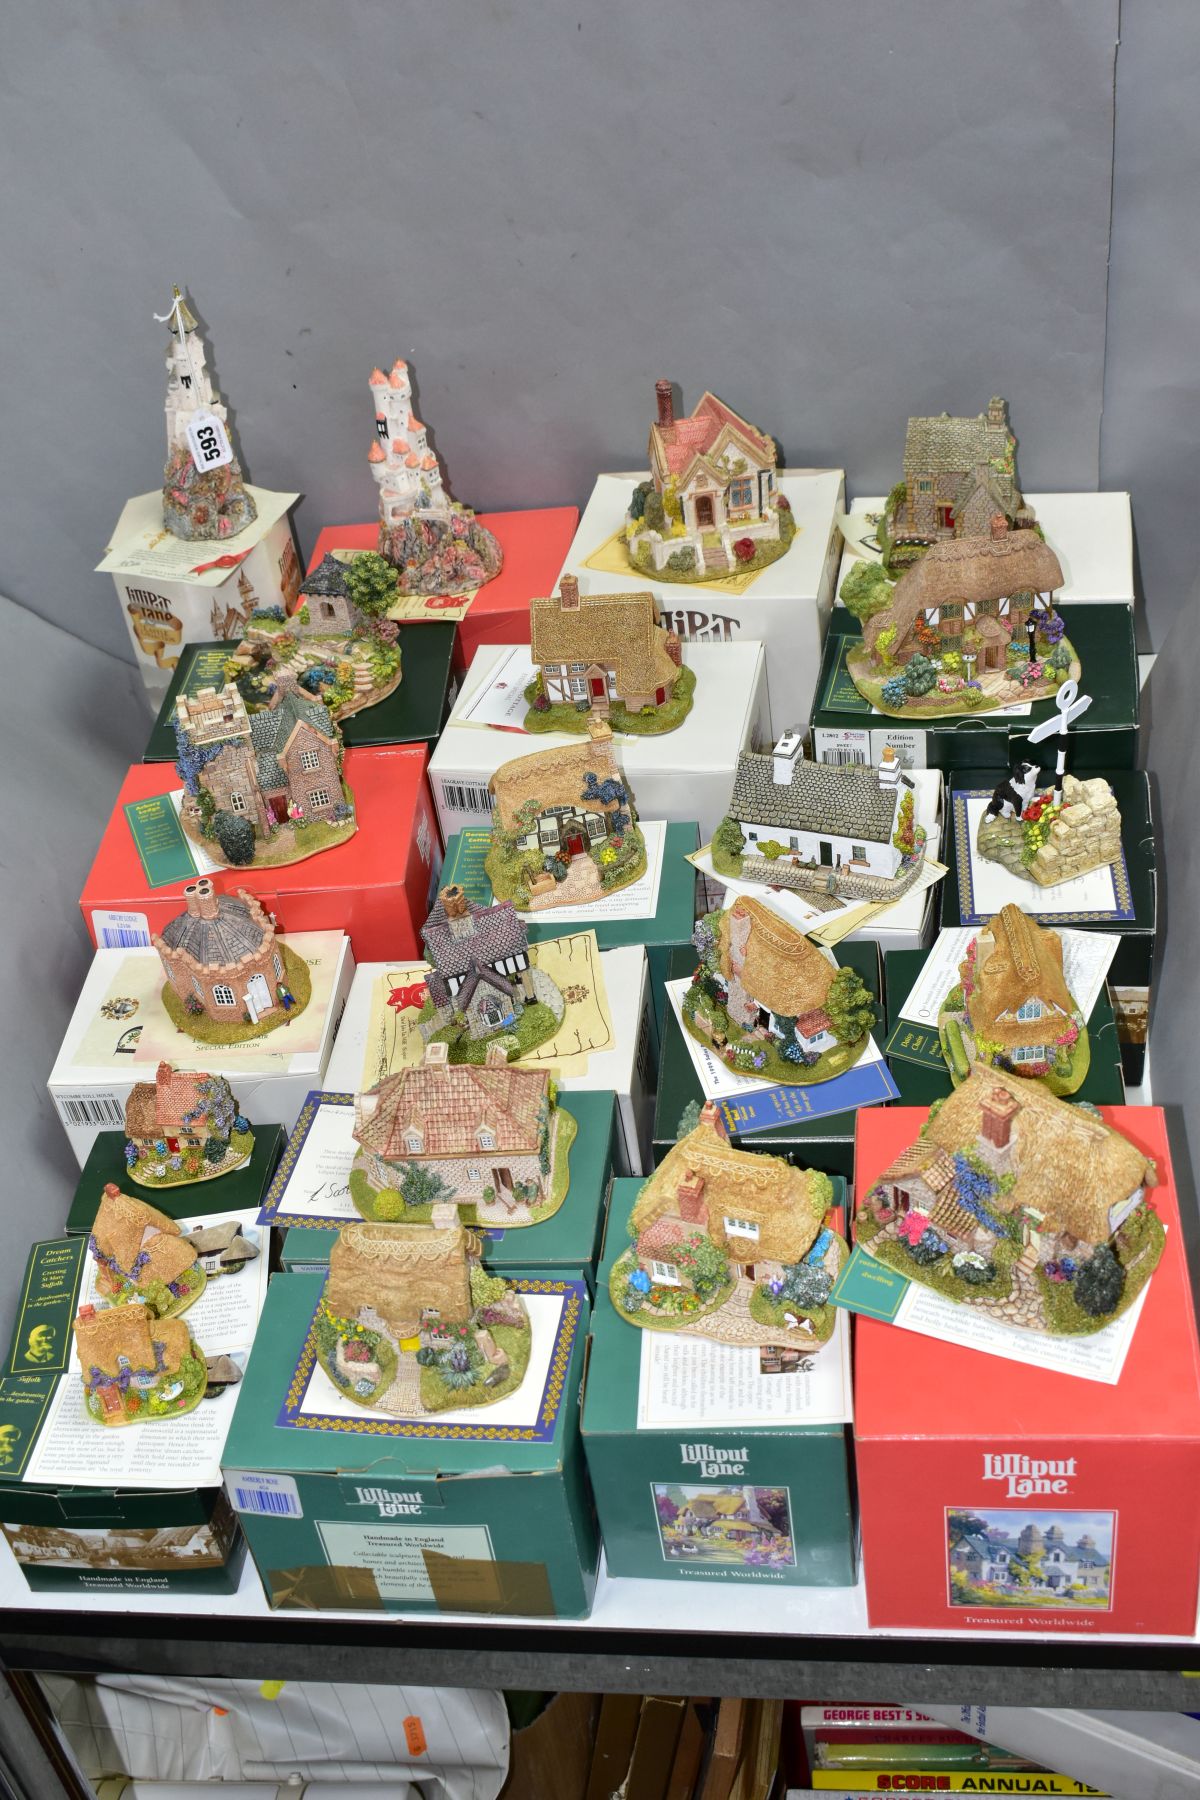 TWENTY TWO BOXED LILLIPUT LANE SCULPTURES, all with deeds except where mentioned, from various